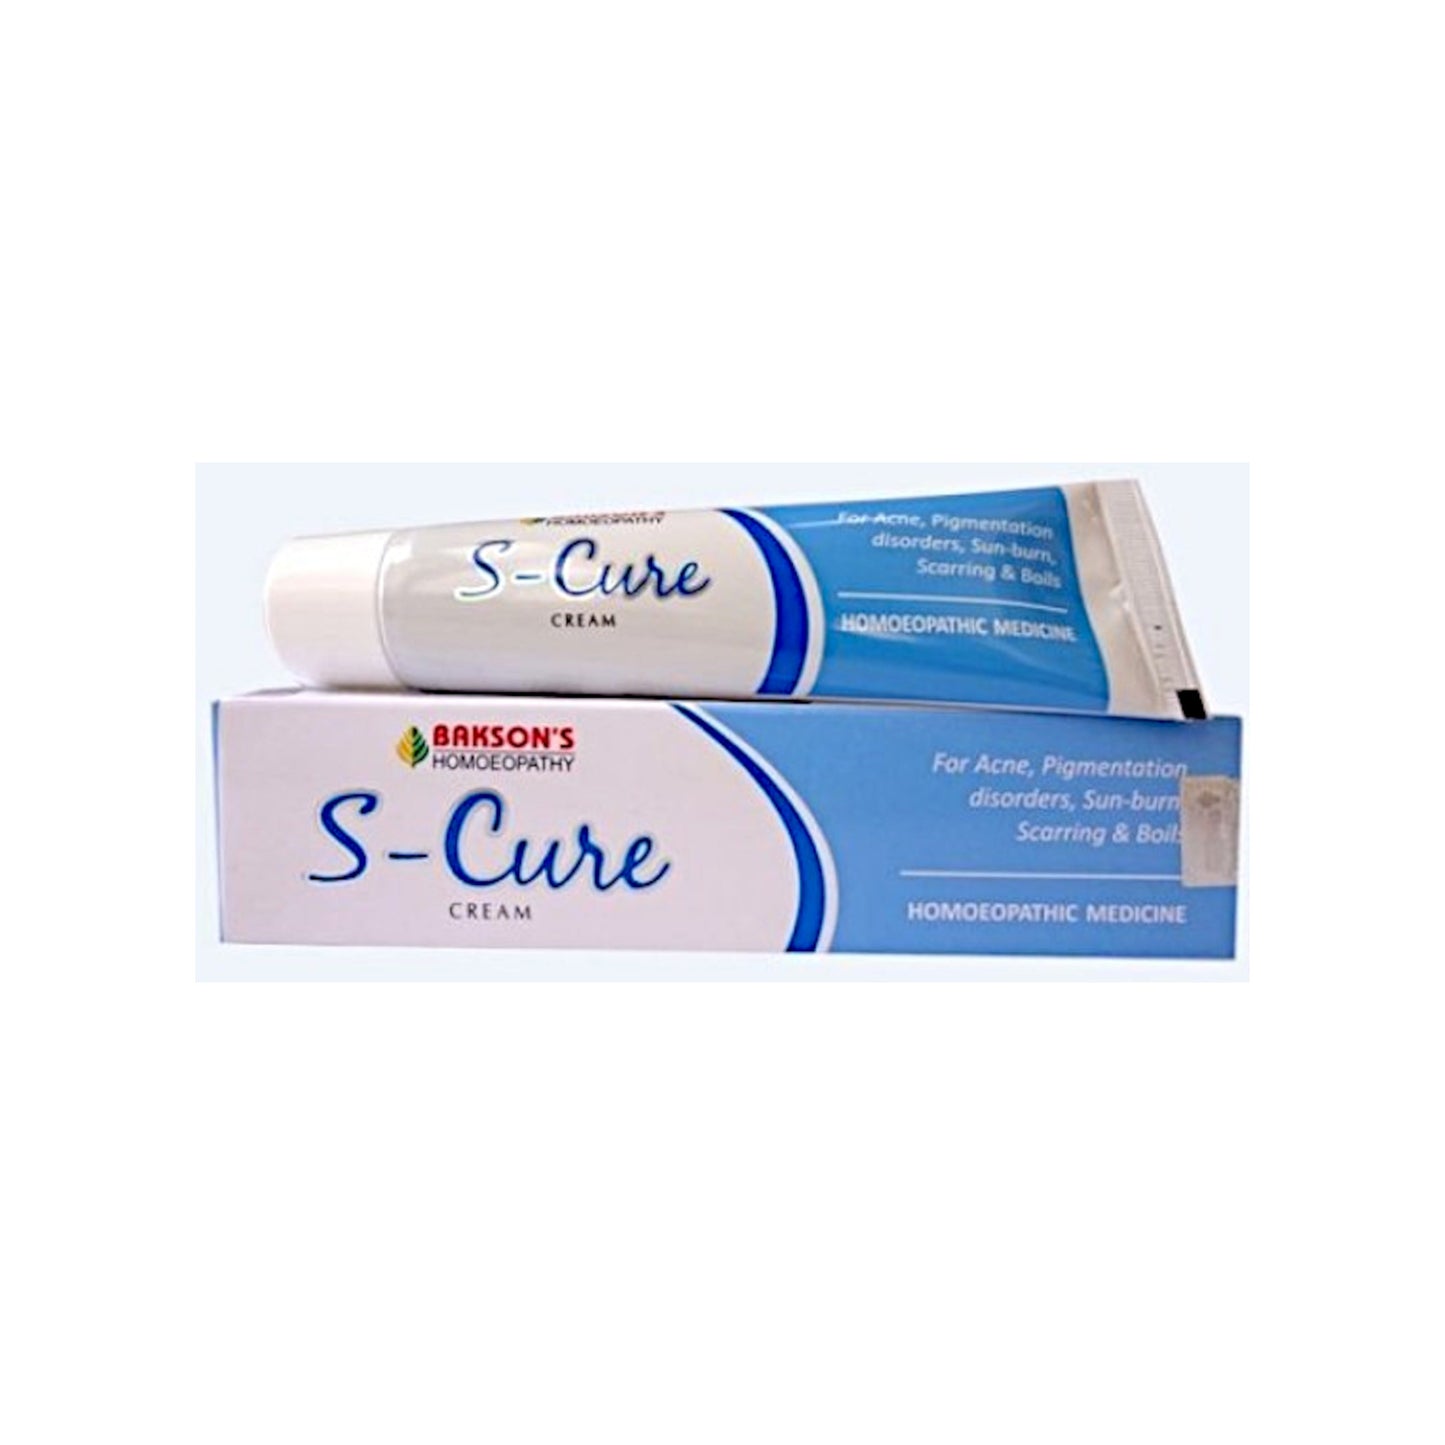 Image: Bakson's S-cure Cream 25 g: Versatile remedy for various skin issues.